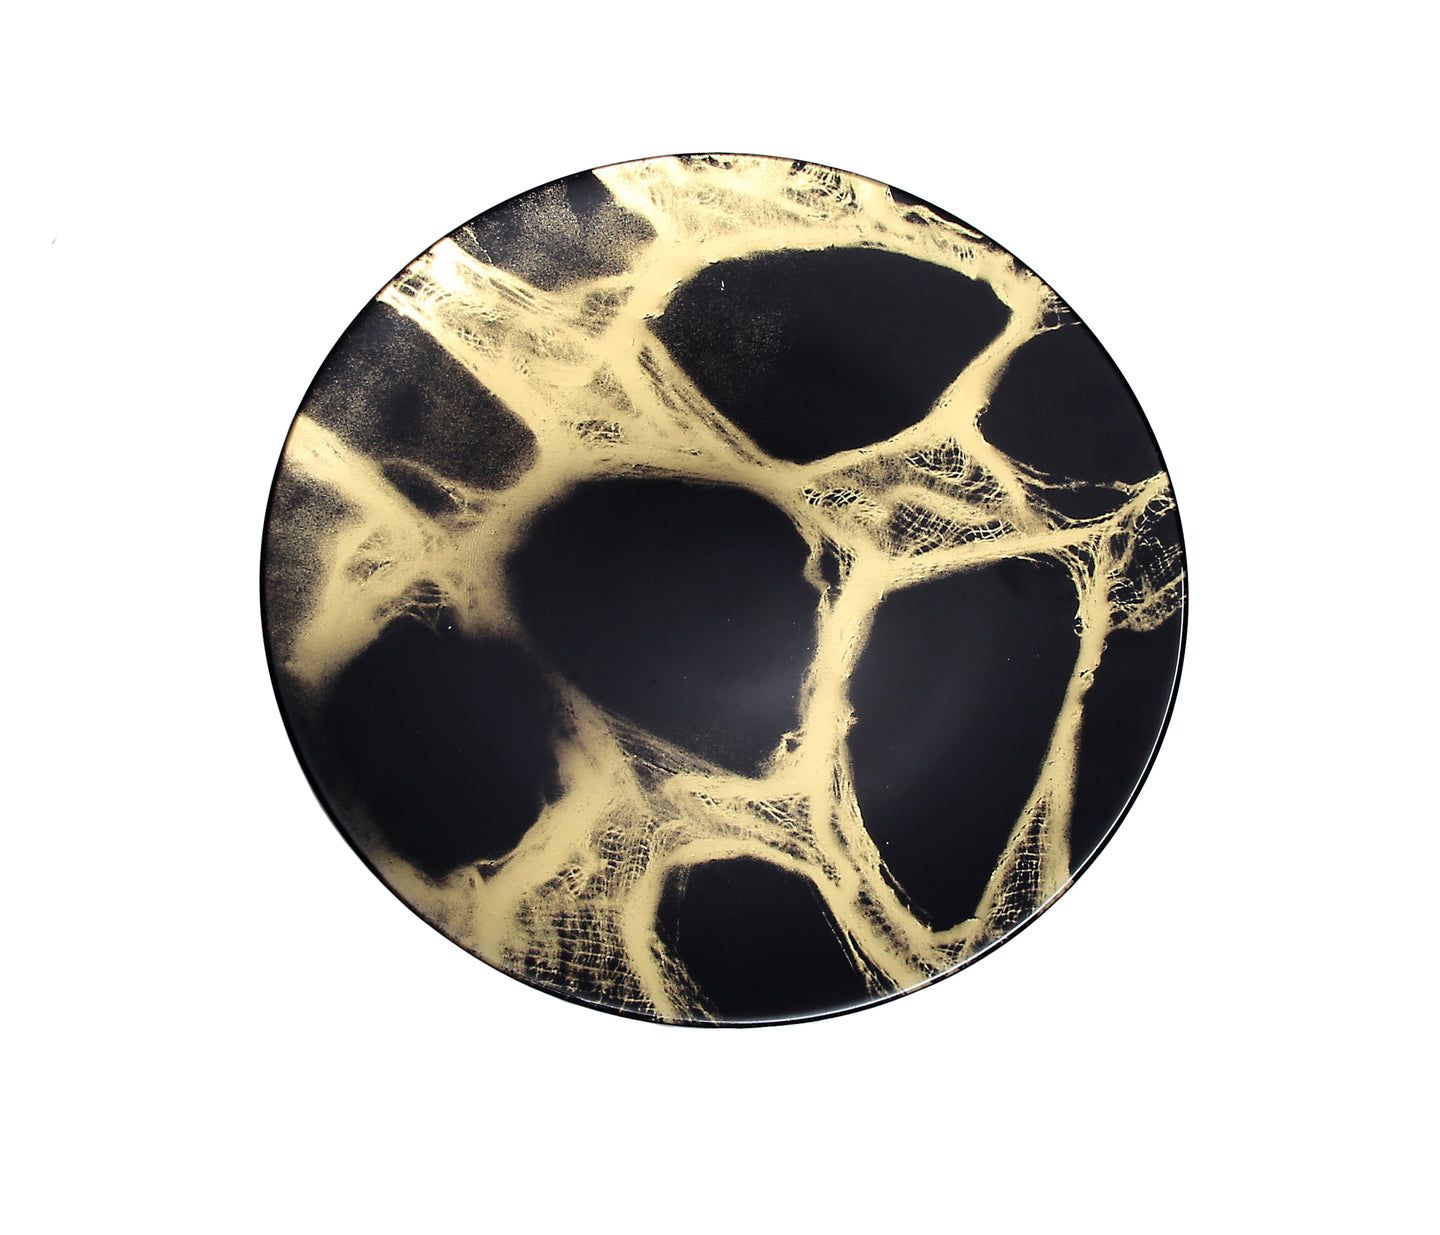 Set of 4 Black and Gold Marbleized Chargers